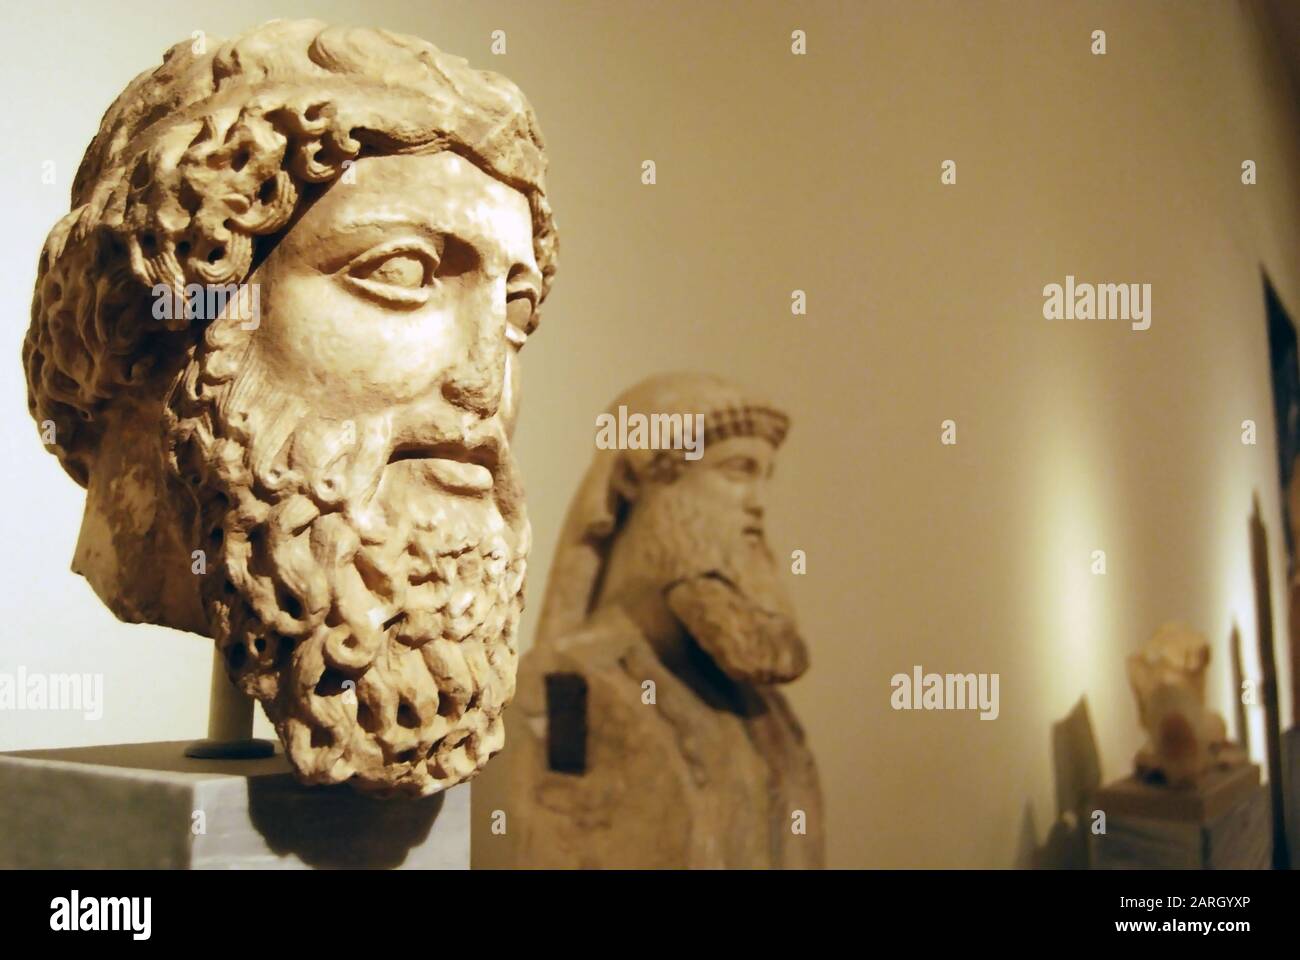 Athens 12/01/2019 Male head and bust, two bearded men with curly hair, ancient greek sculptures in museum, selective focus Stock Photo